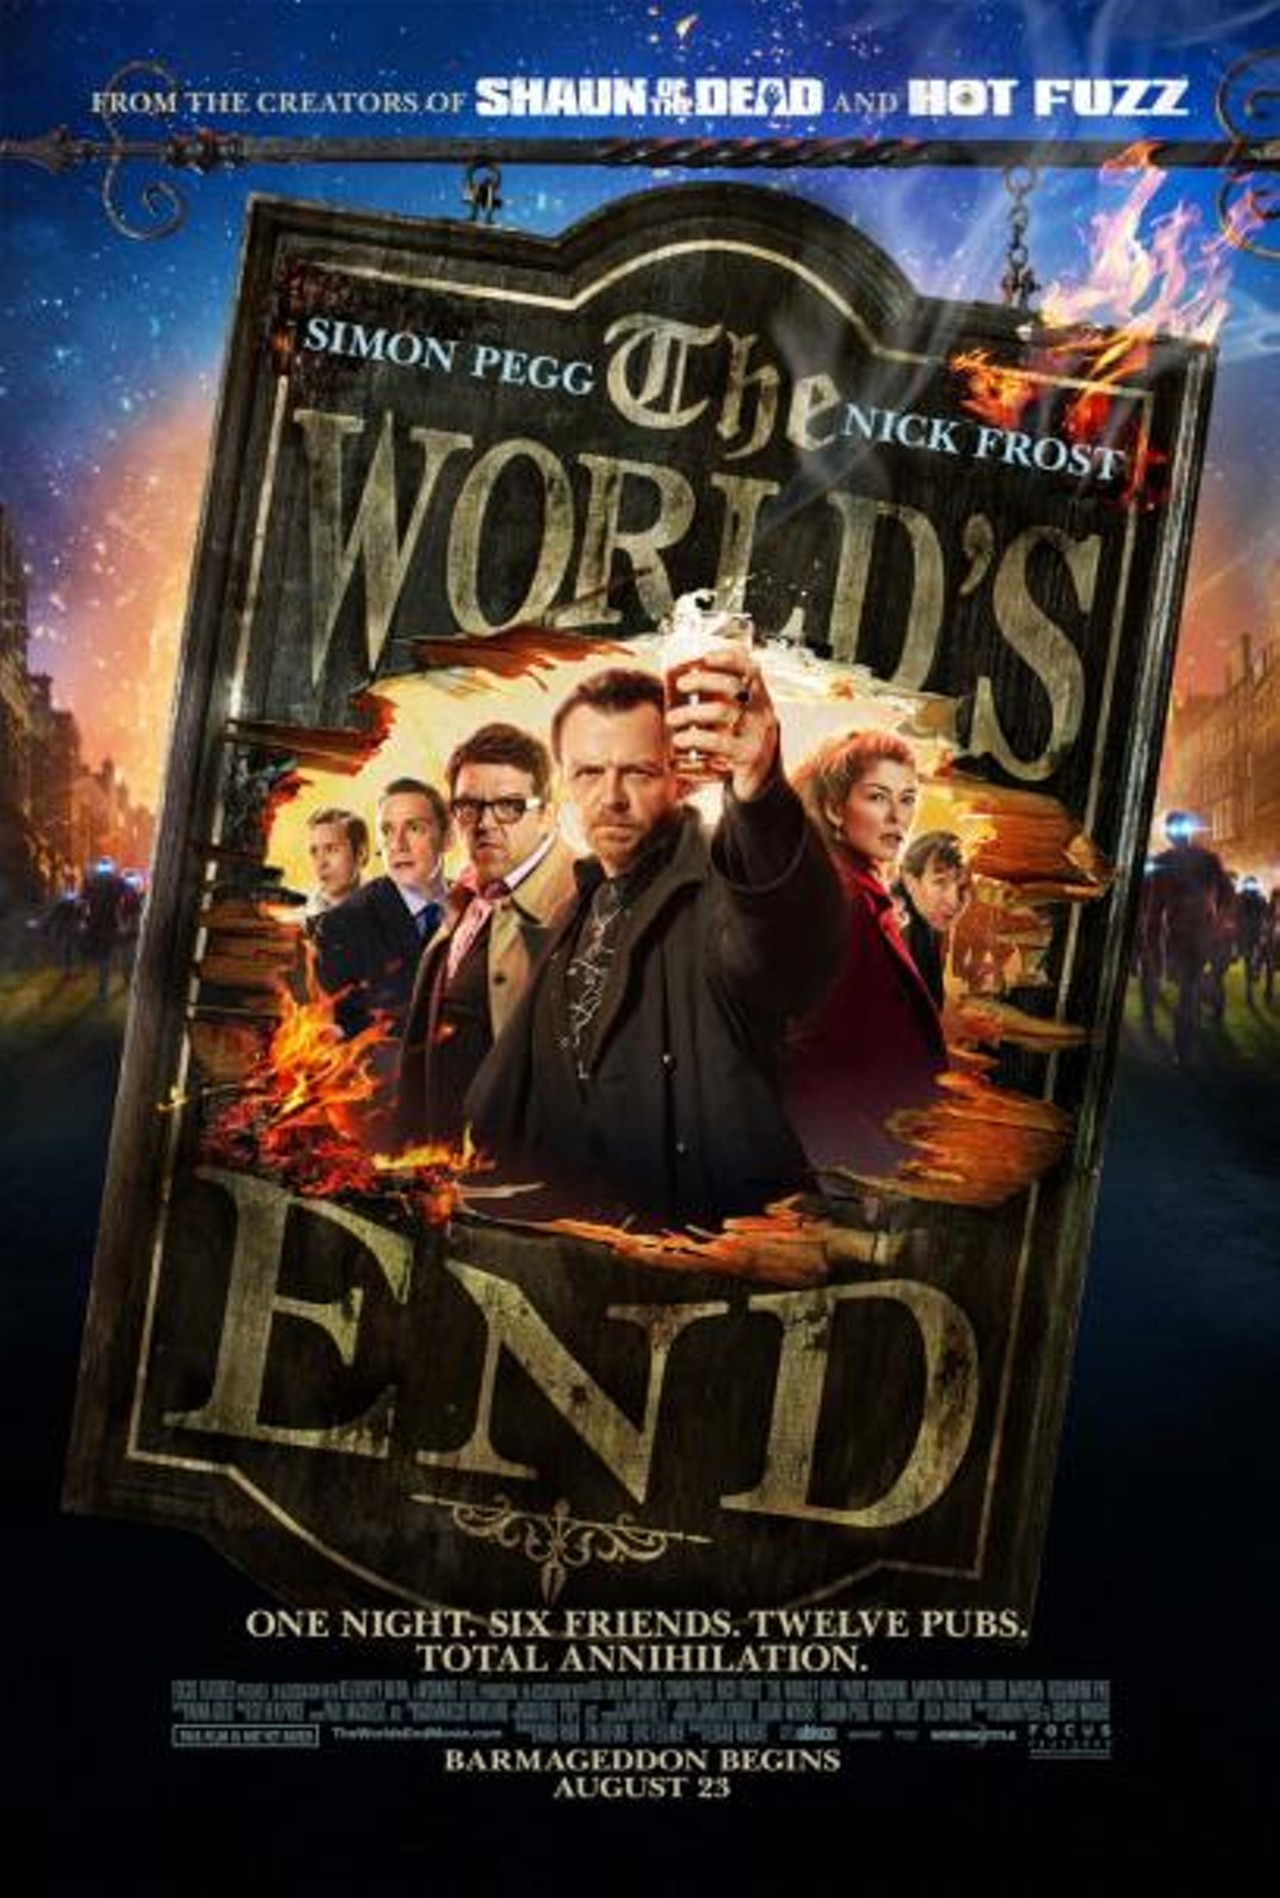 The World’s End, the story of five guys who go on a pub crawl from hell, unites the comedic duo Nick Frost and Simon Pegg (along with writer/director Edgar Wright) for the final installment of their Three Flavours Cornetto Trilogy. Pegg plays Gary, a Goth rocker who doesn’t want to grow up and still wears his old Sisters of Mercy T-shirt in homage to his high school days. Trouble is, his pals have all matured and they reluctantly let him lead them on a quest to complete a pub crawl they once started but never finished. The sci-fi element is rather preposterous but the banter between Frost and Pegg is so sharp it redeems the film despite its flawed concept. (Jeff Niesel)